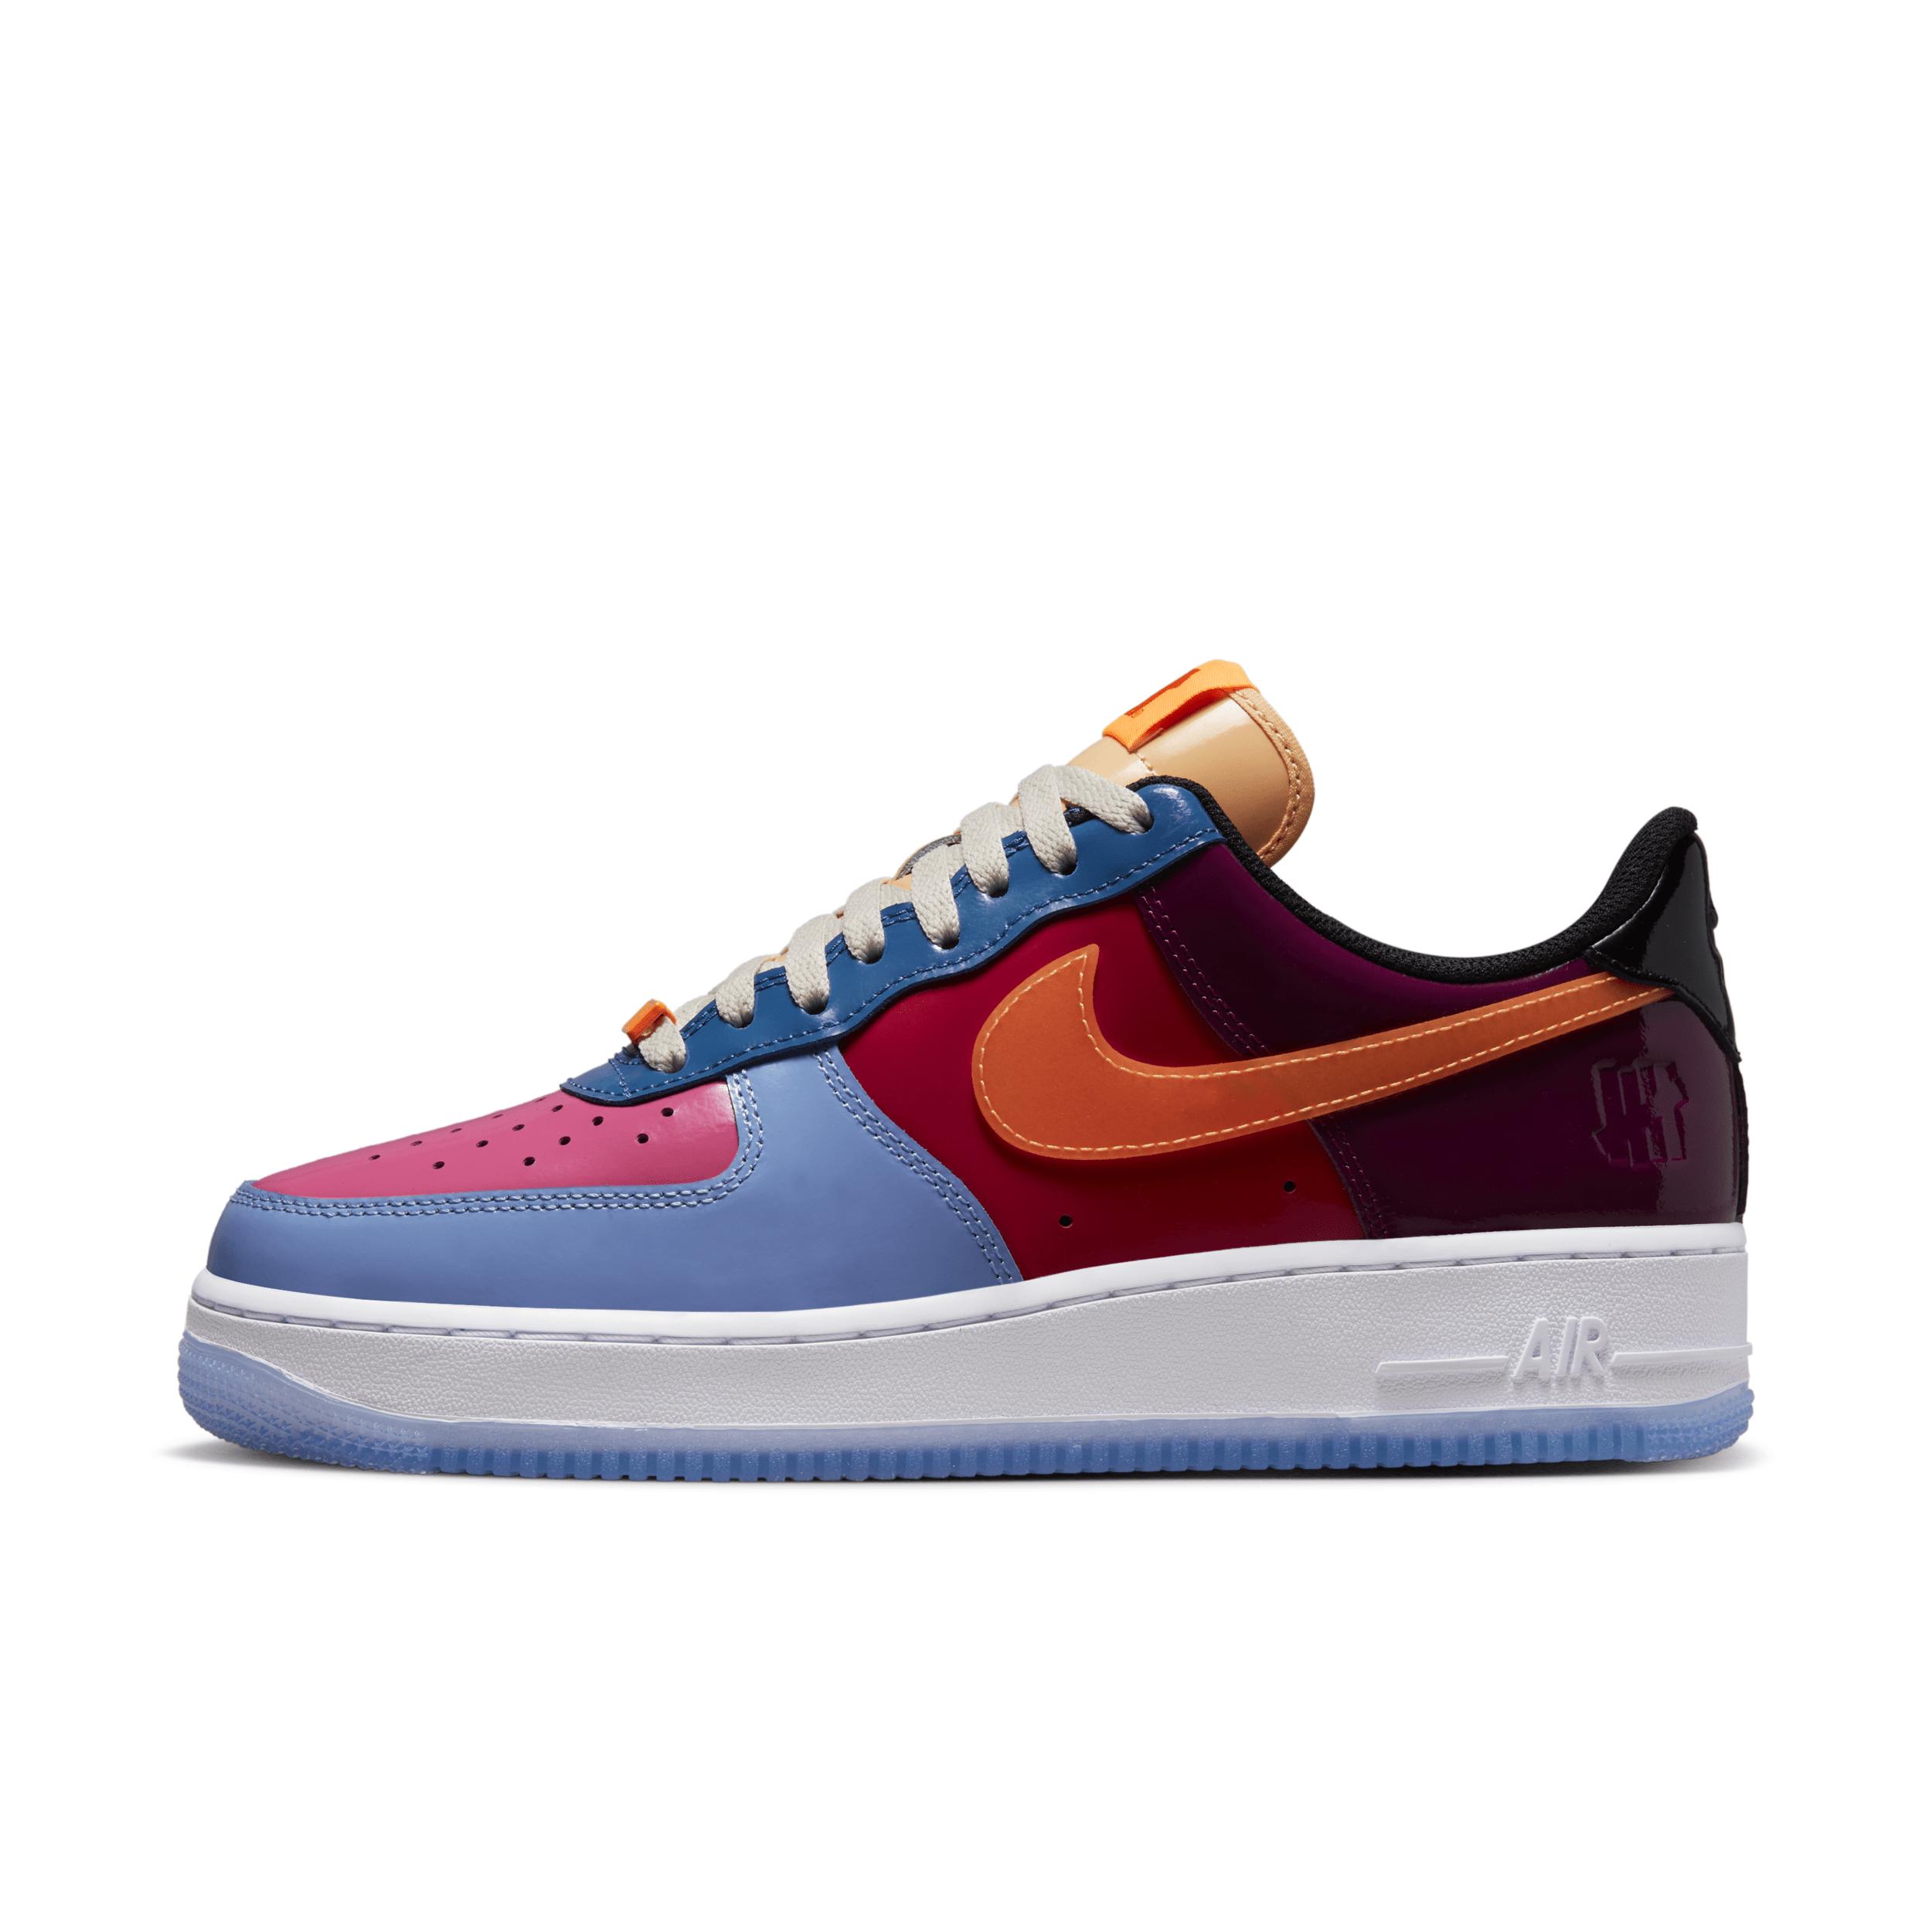 NIKE MEN'S AIR FORCE 1 LOW X UNDEFEATED SHOES,14295086